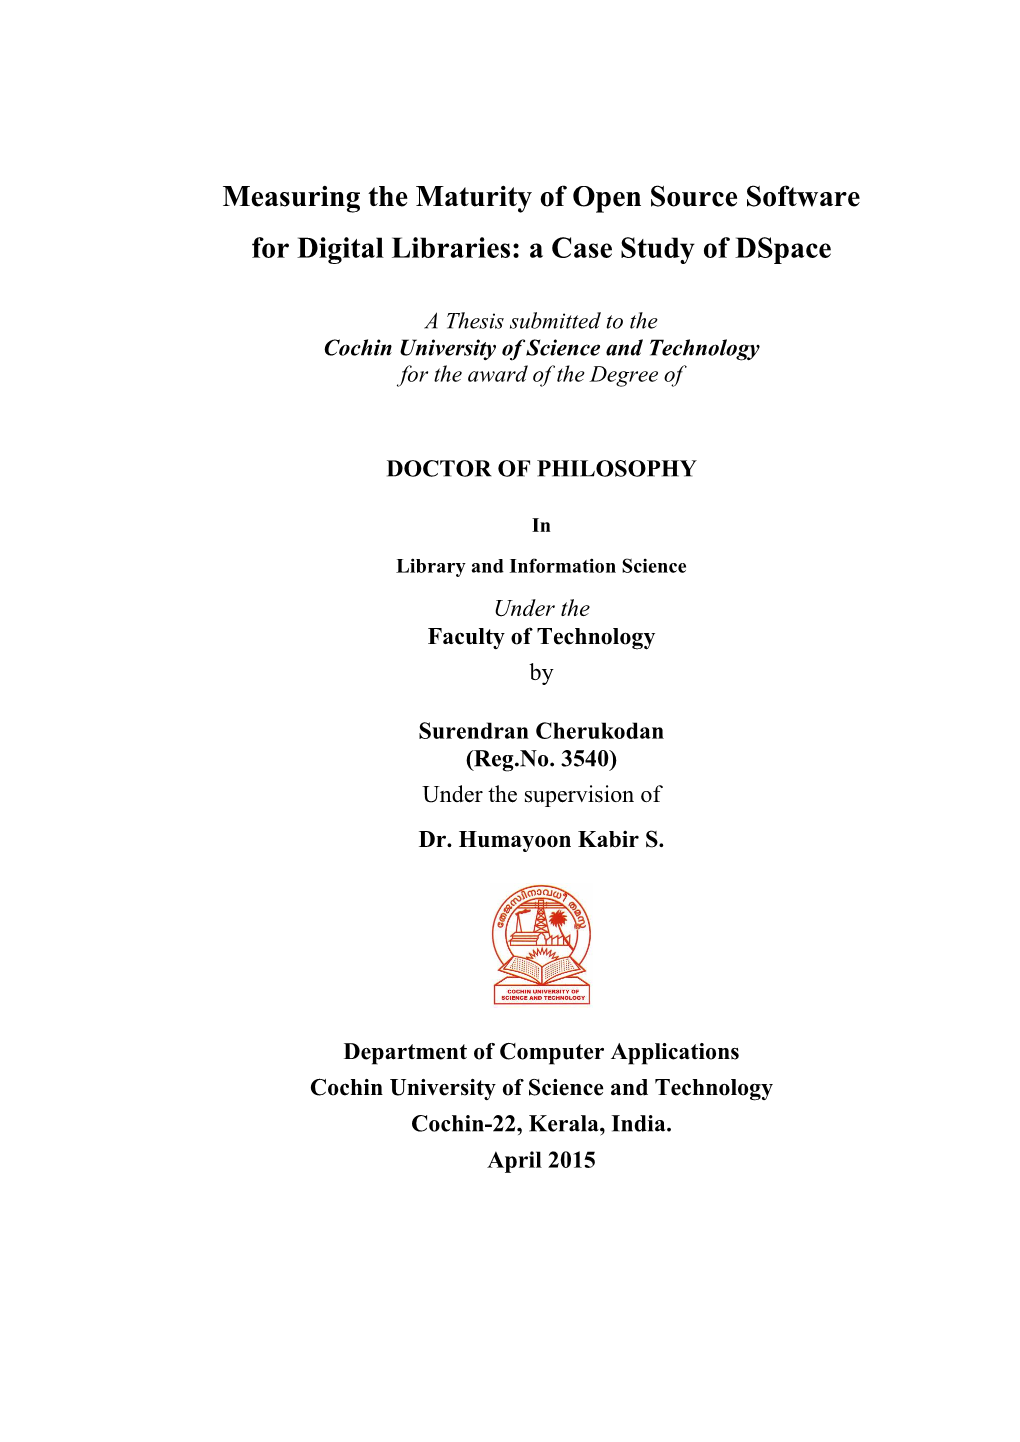 Measuring the Maturity of Open Source Software for Digital Libraries: a Case Study of Dspace